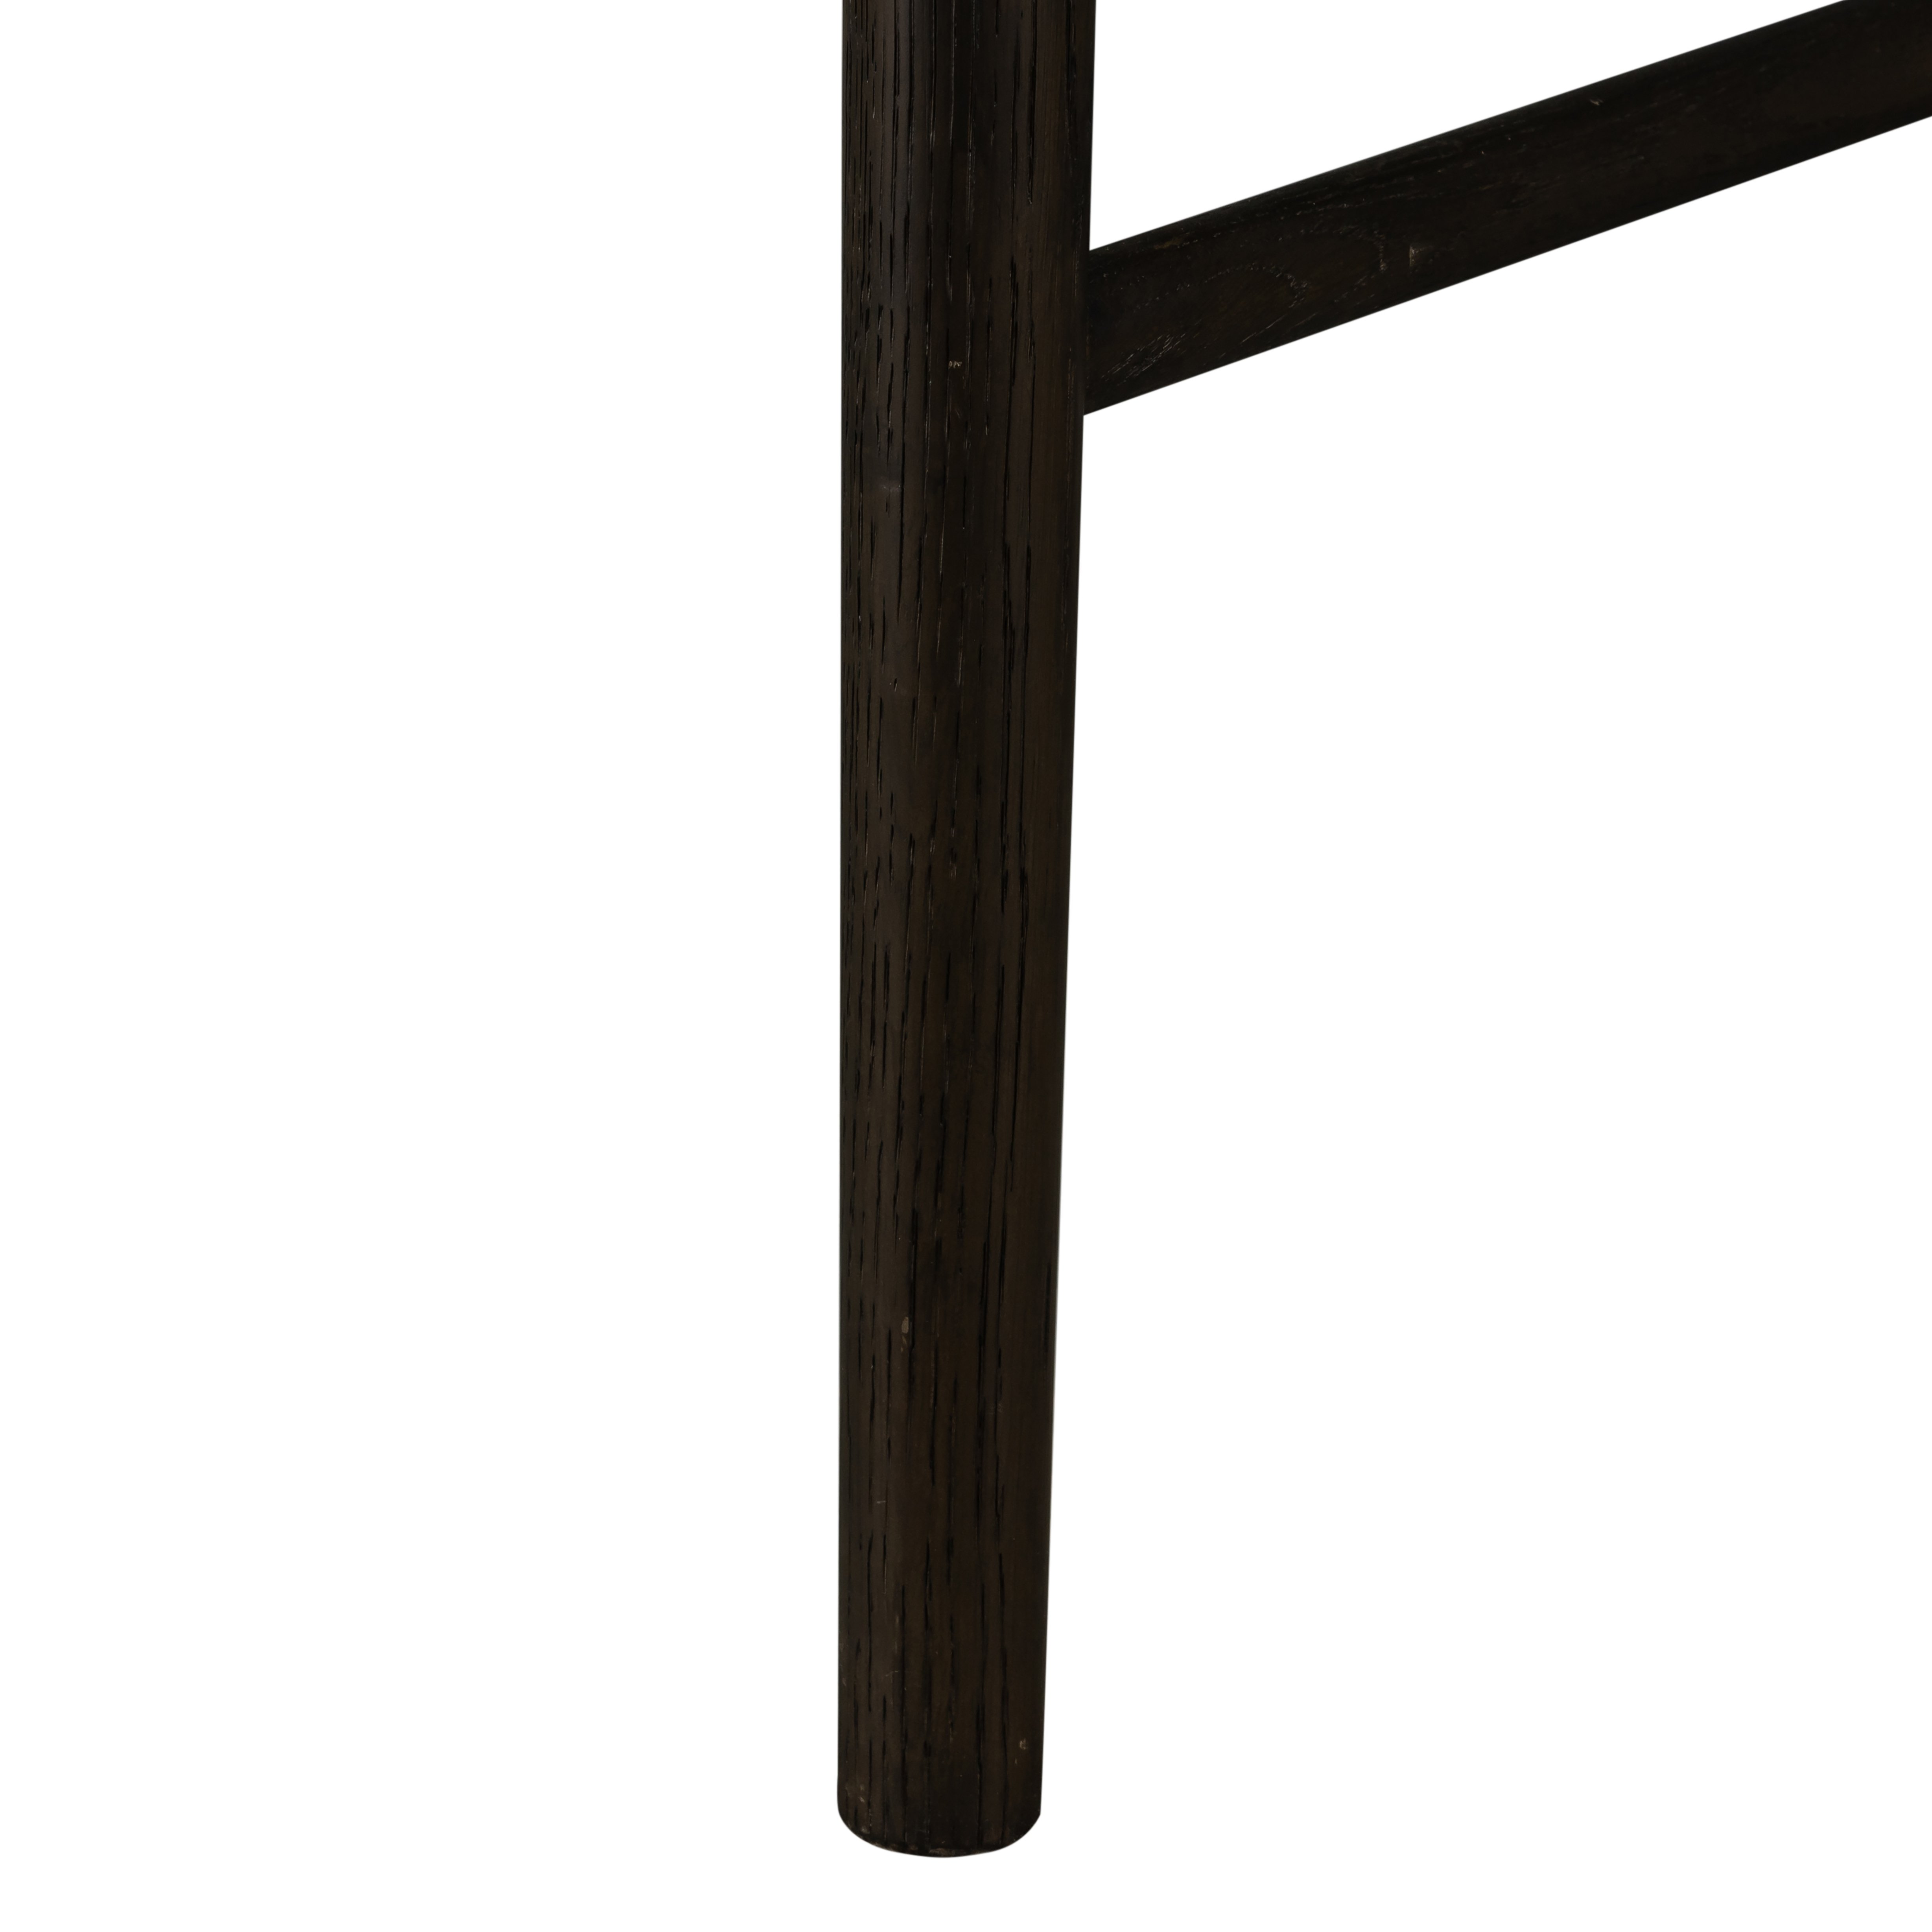 Glenmore Dining Chair-Essence Natural - Image 9